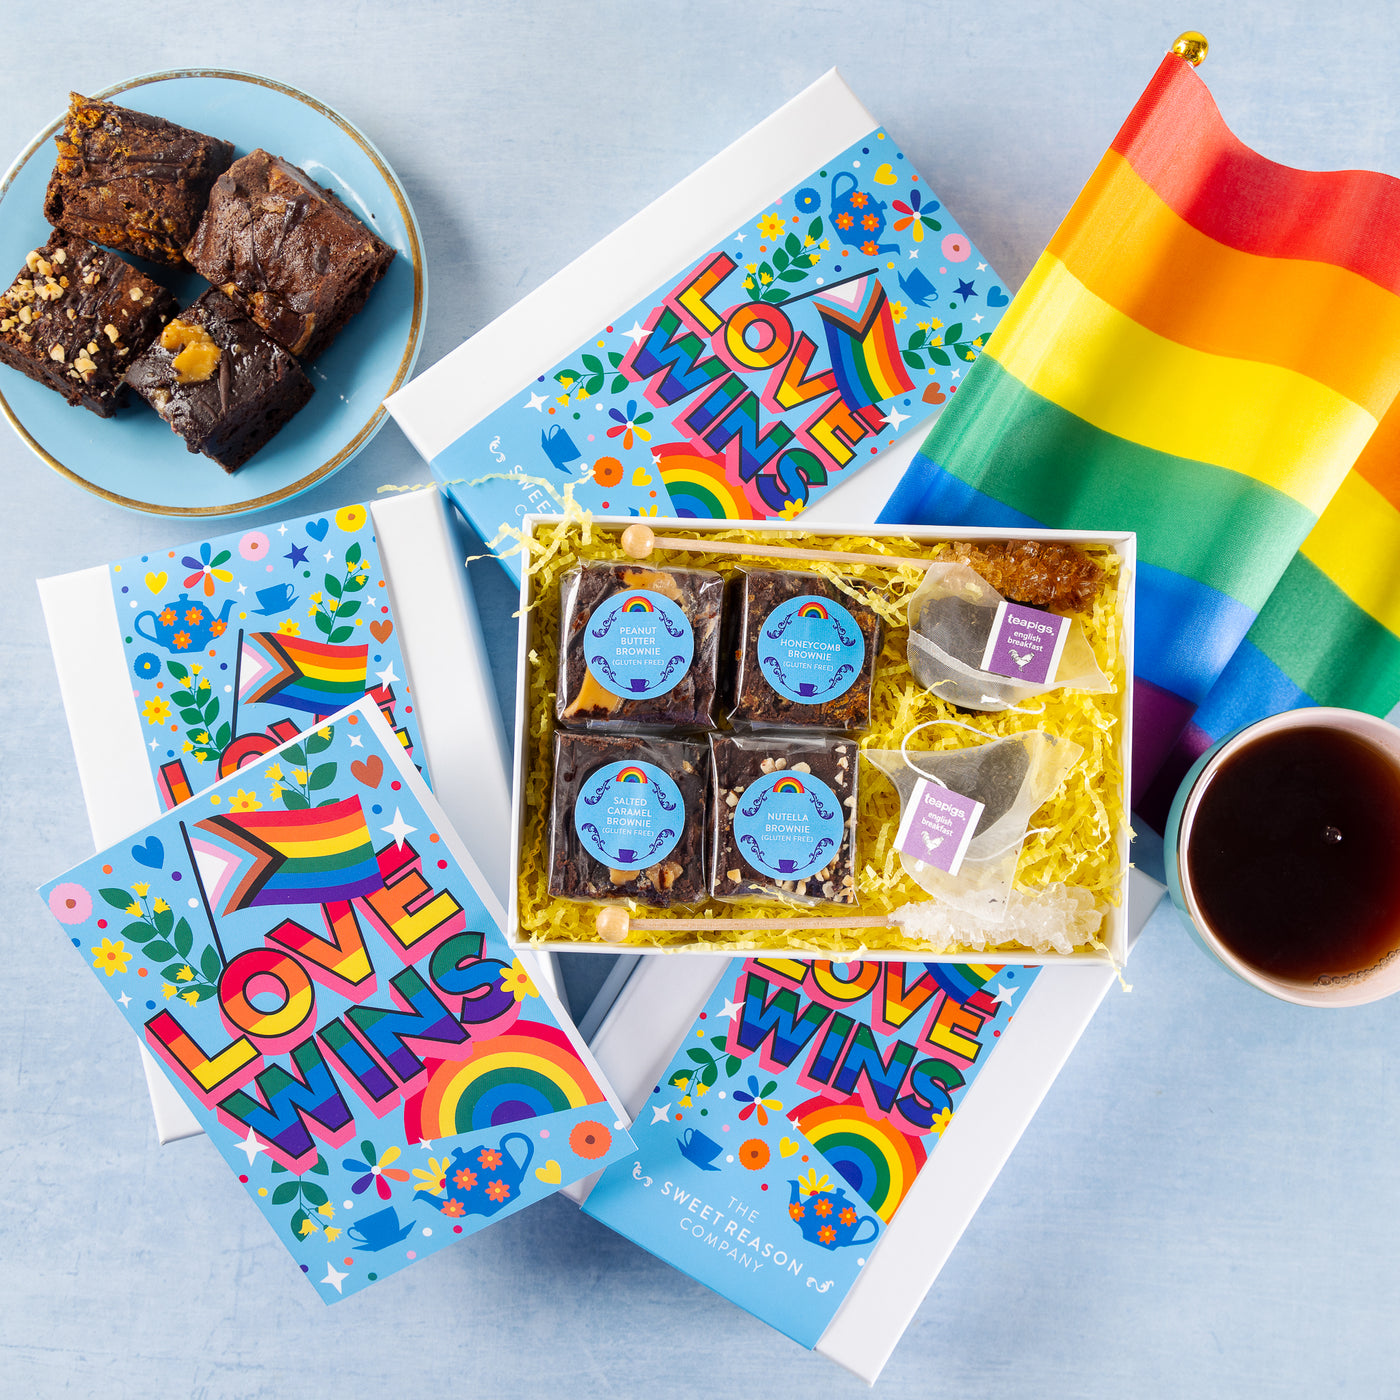 'Pride' Gluten Free Afternoon Tea for Two